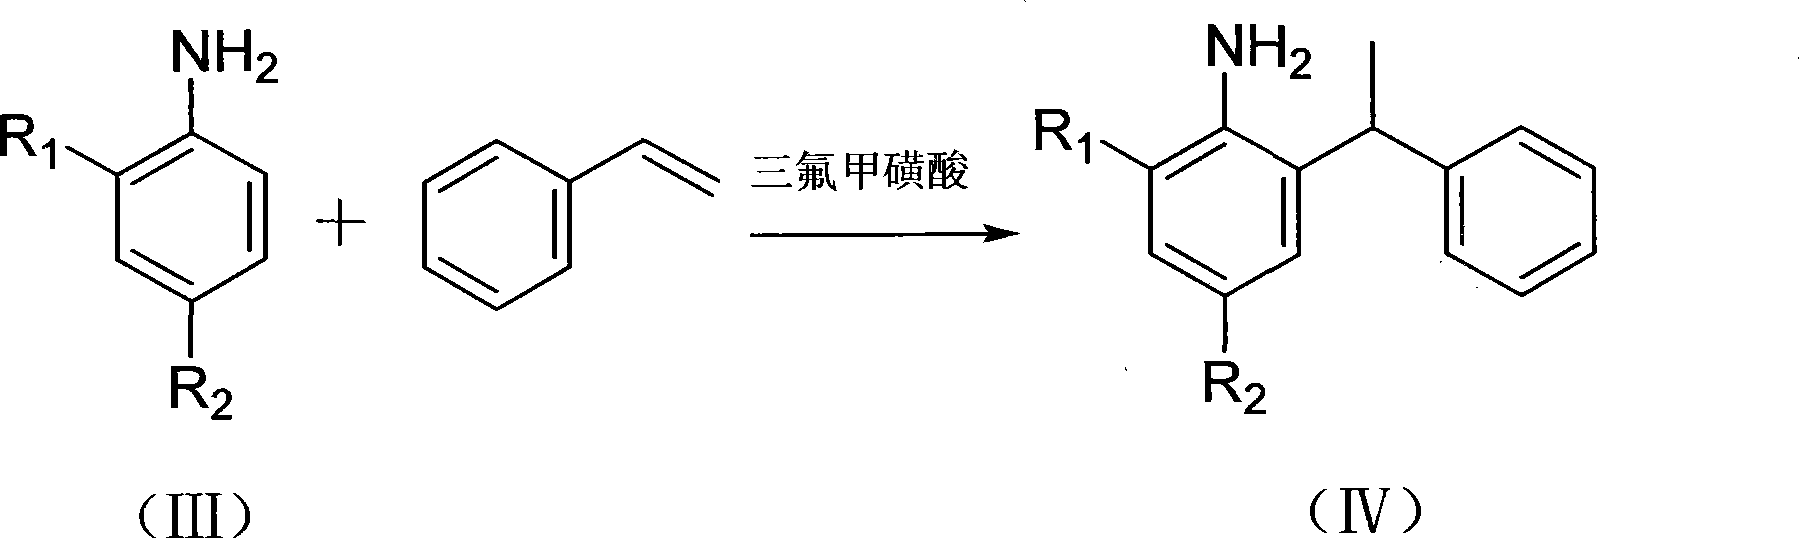 Pyridine diimine iron olefin polymerizing catalyst, as well as preparation method and application thereof